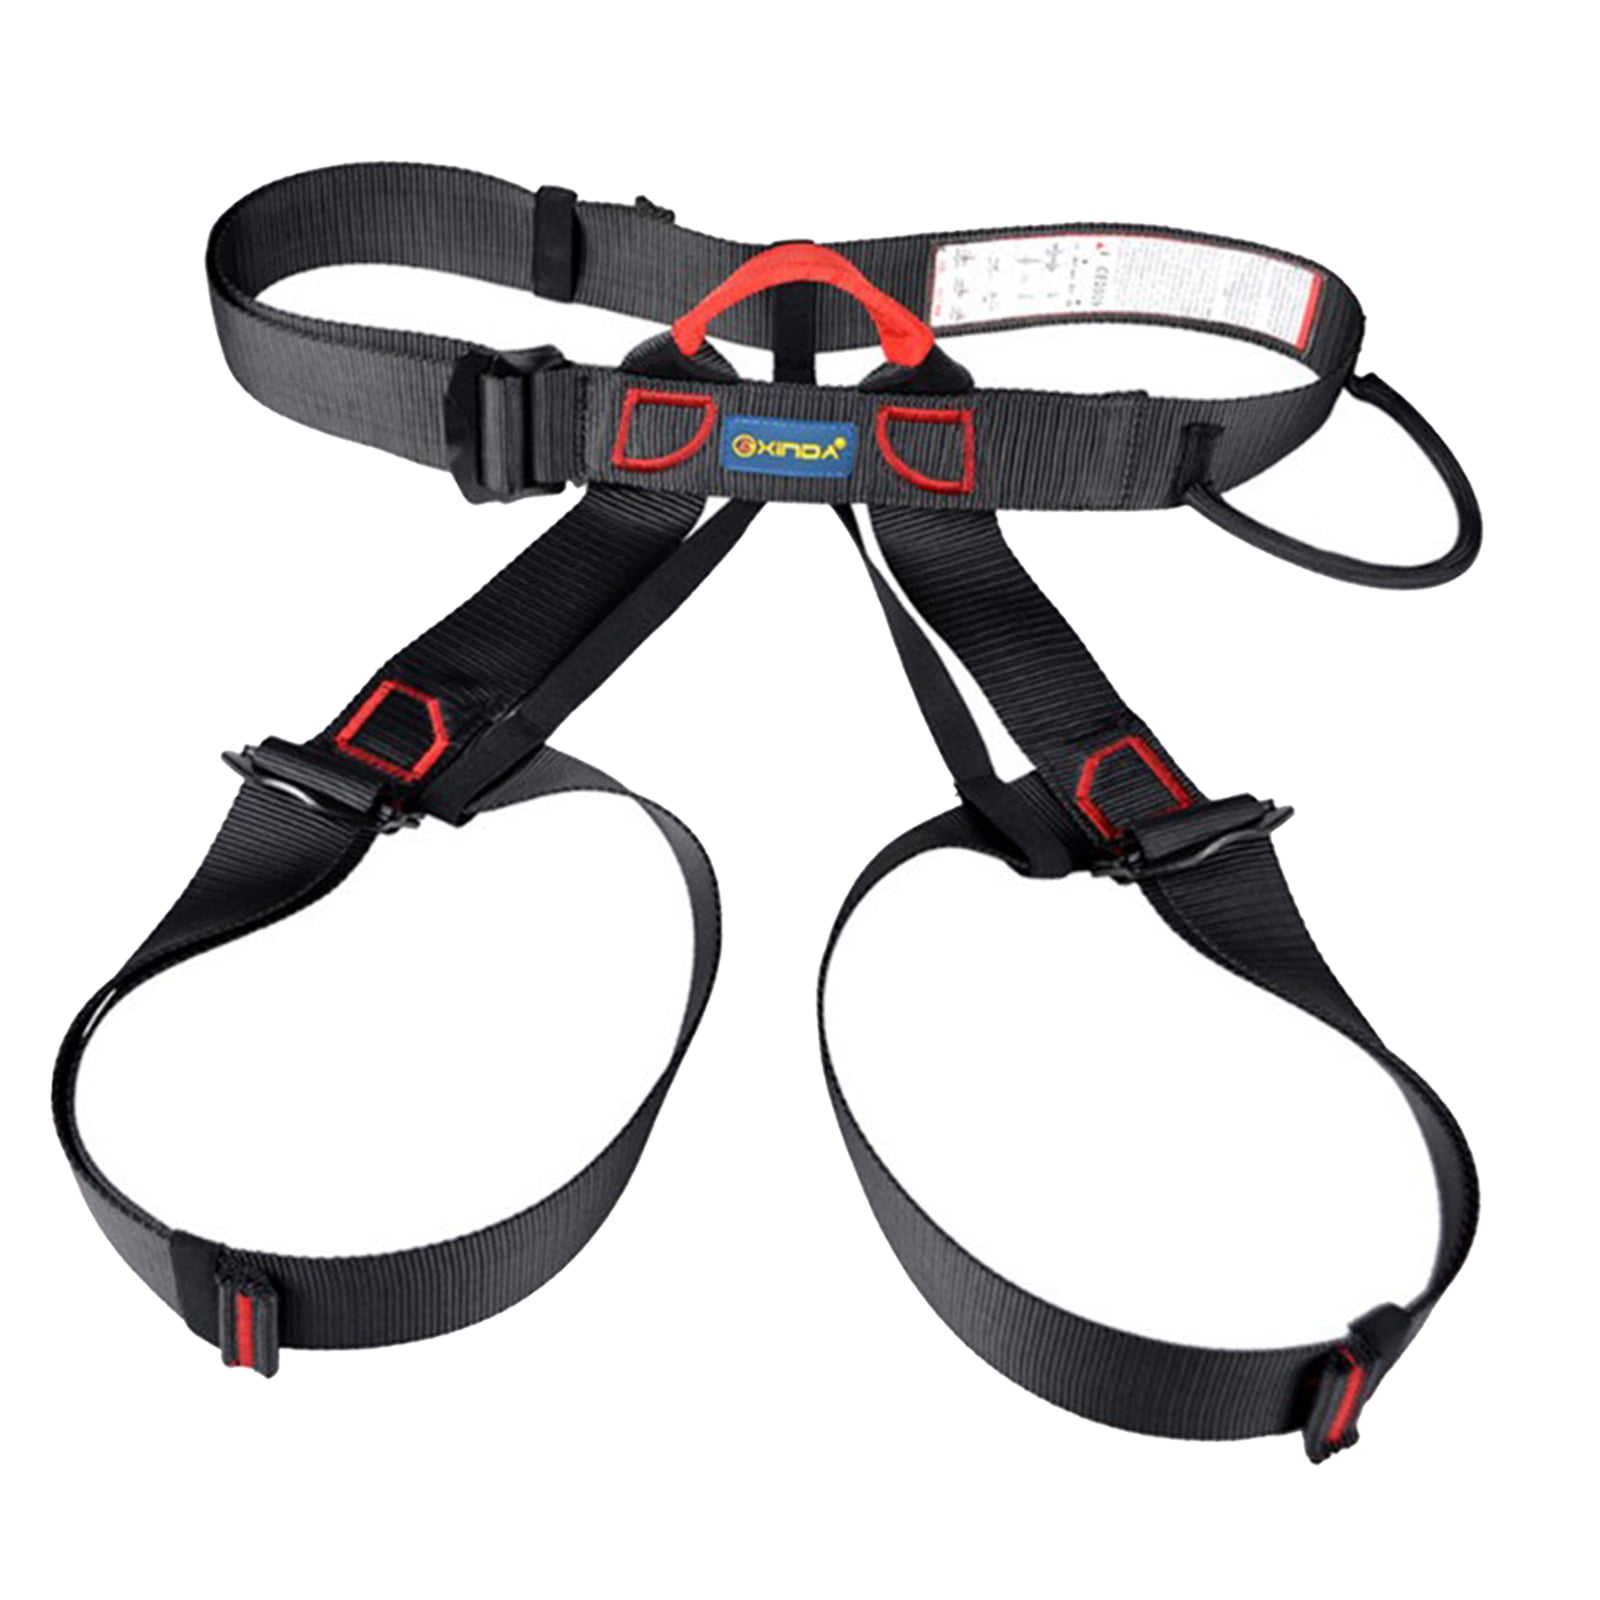 Outdoor Rescue Rock Climbing Rappelling Equip Half Body Guide Harness Selighting Climbing Harness Half Body Protective Waist Safety Harness 